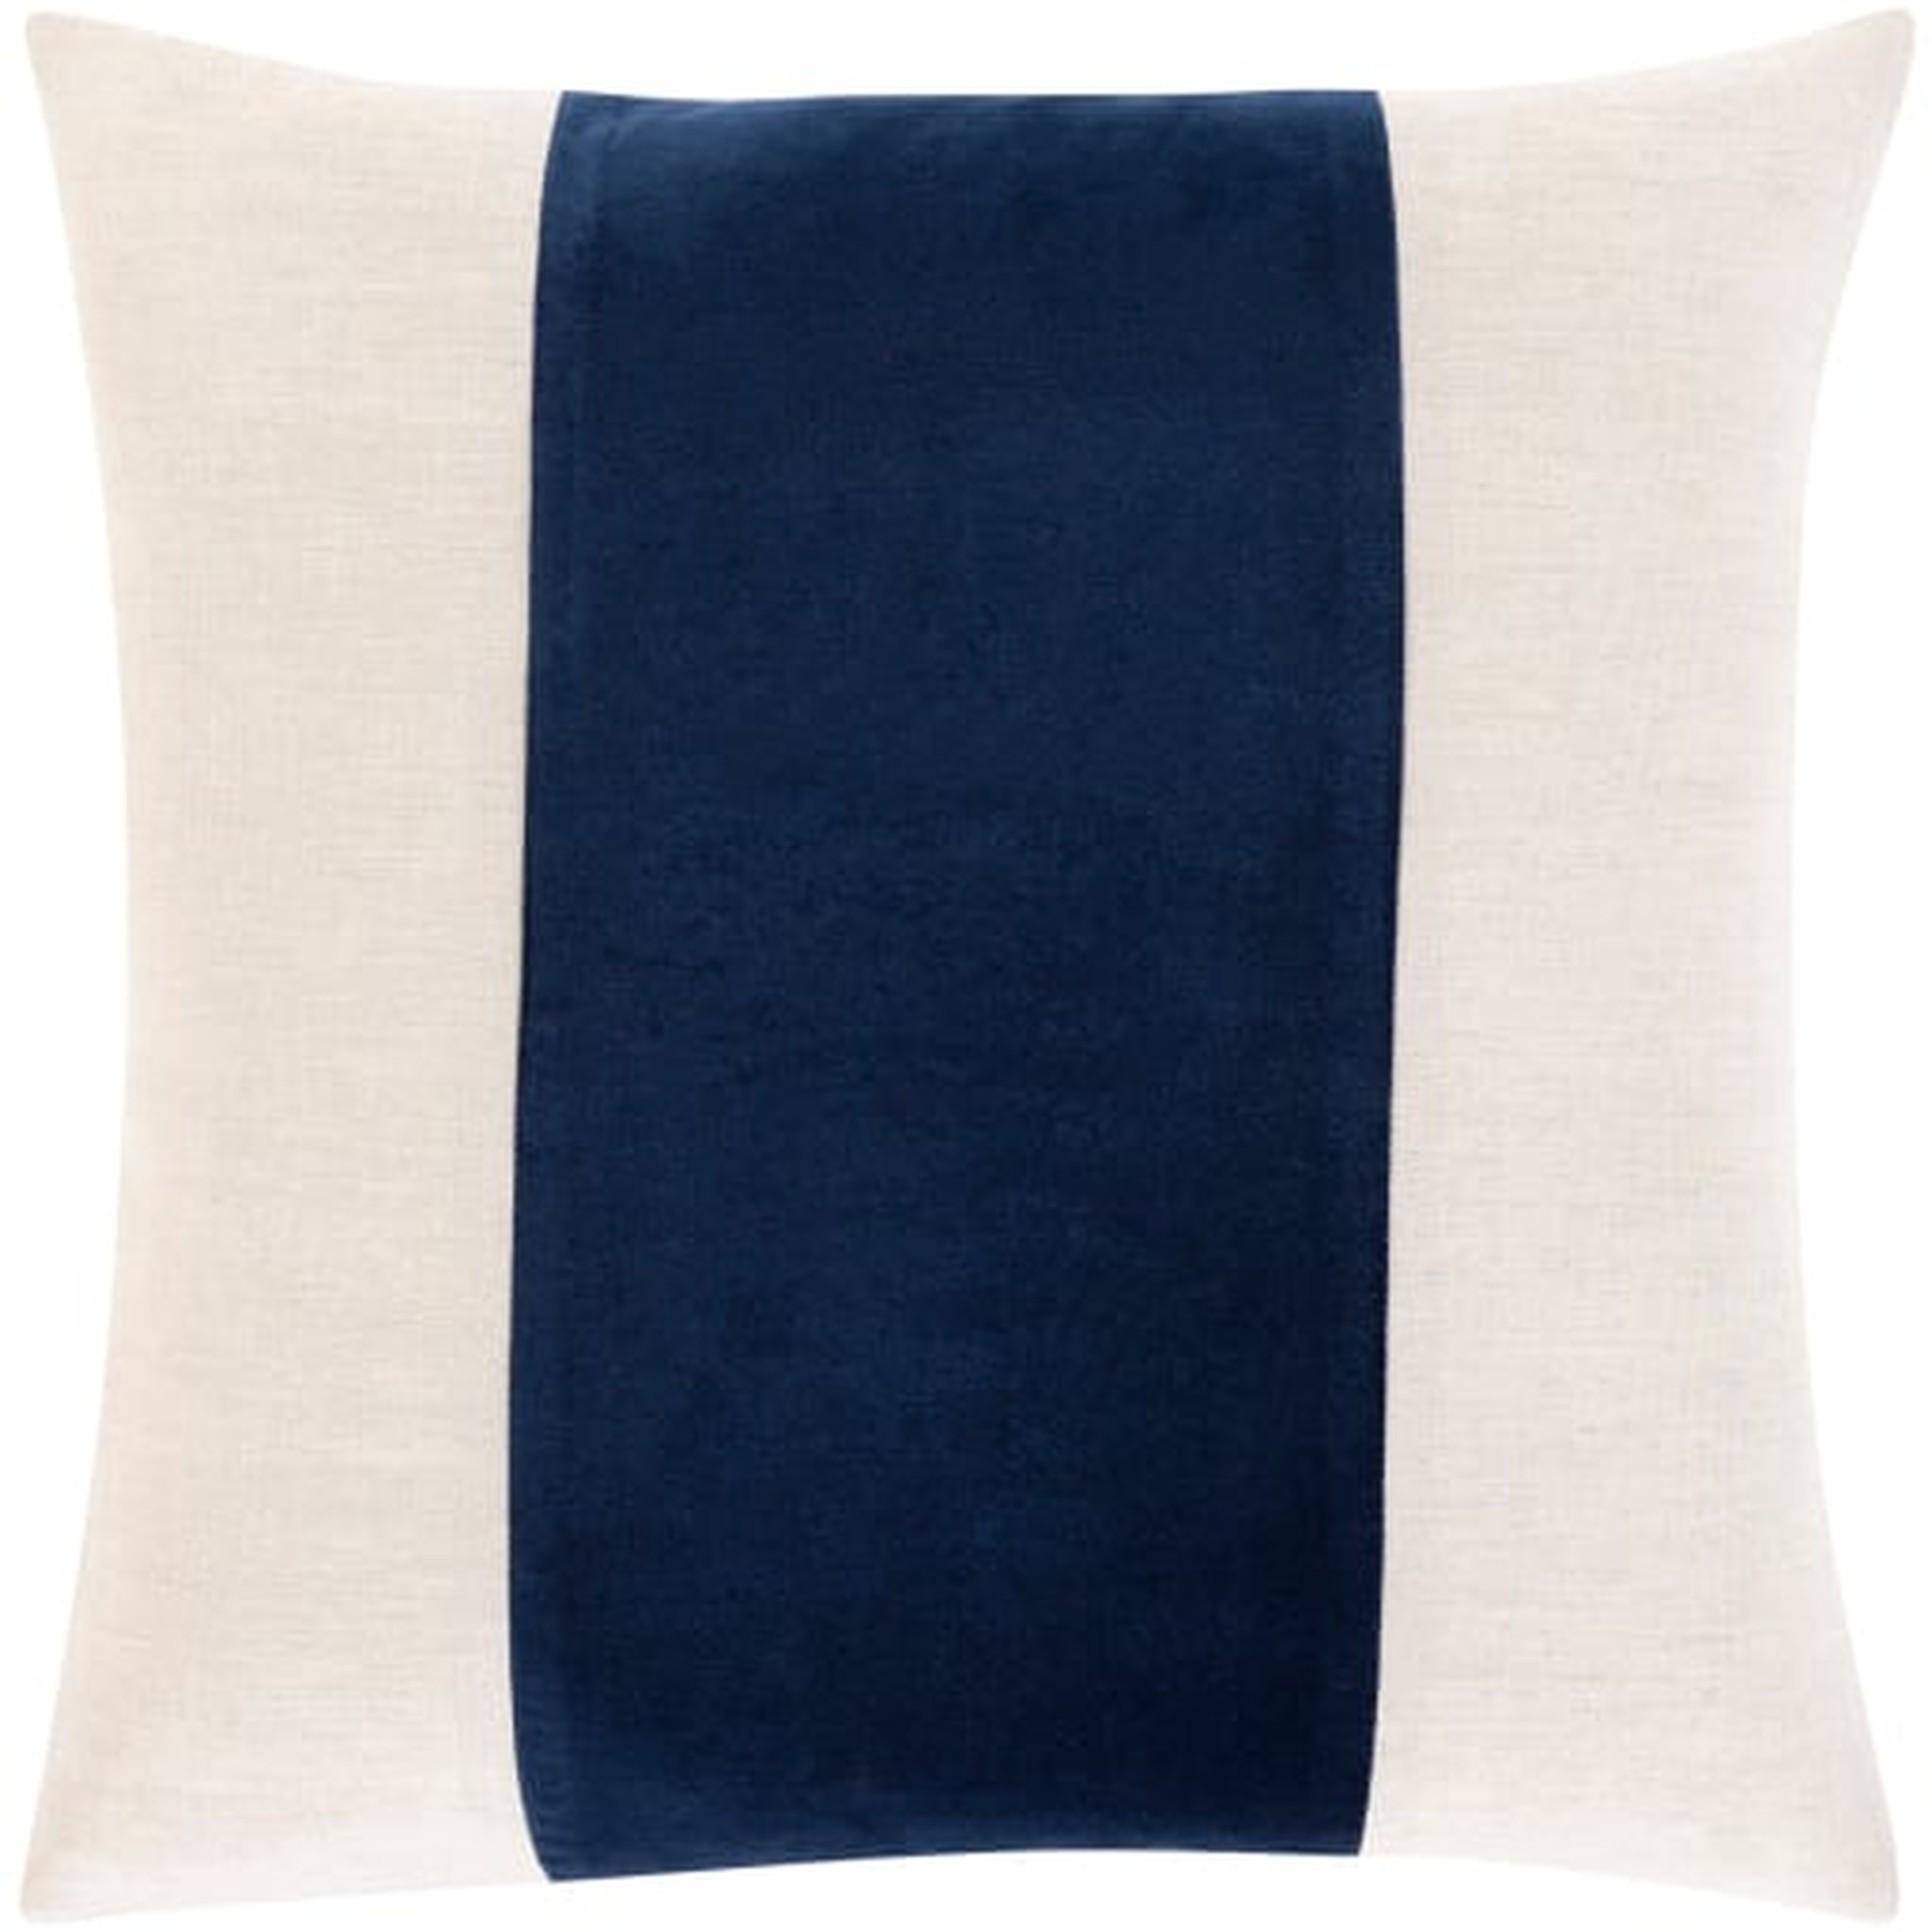 Moza - MZA-003 - 18" x 18" - pillow cover only - Surya